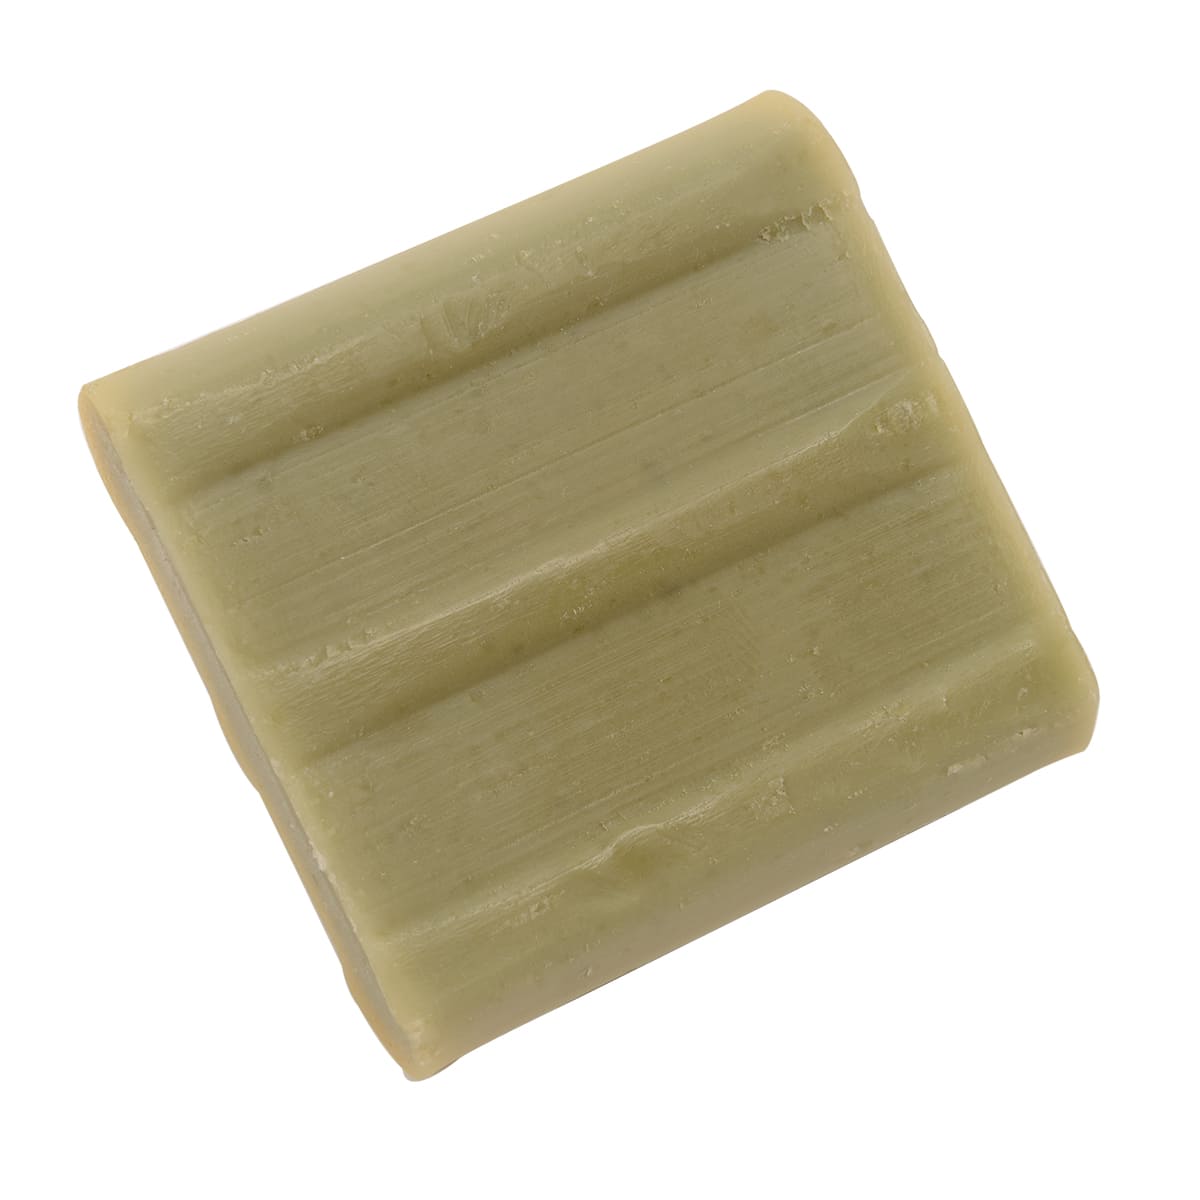 Mini Marseille soap with olive oil 25g - Cosmos Natural